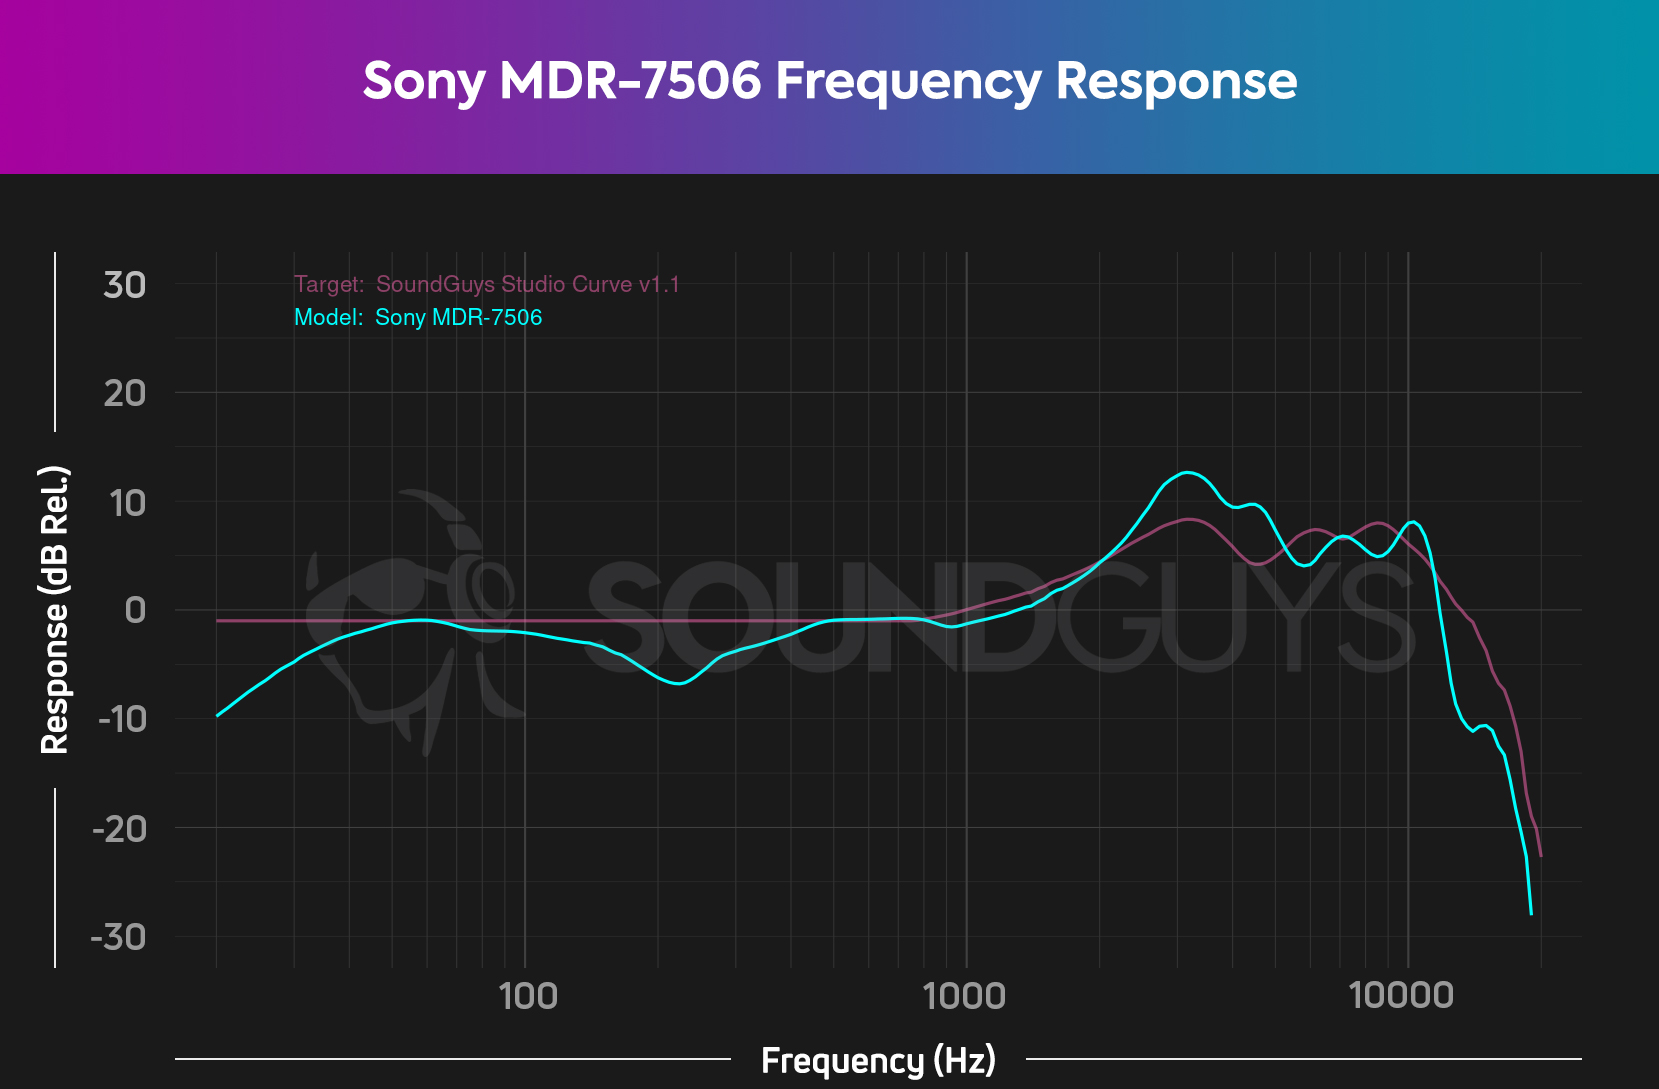 Chart depicts the frequency response of the Sony MDR-7506 compared to our studio curve.